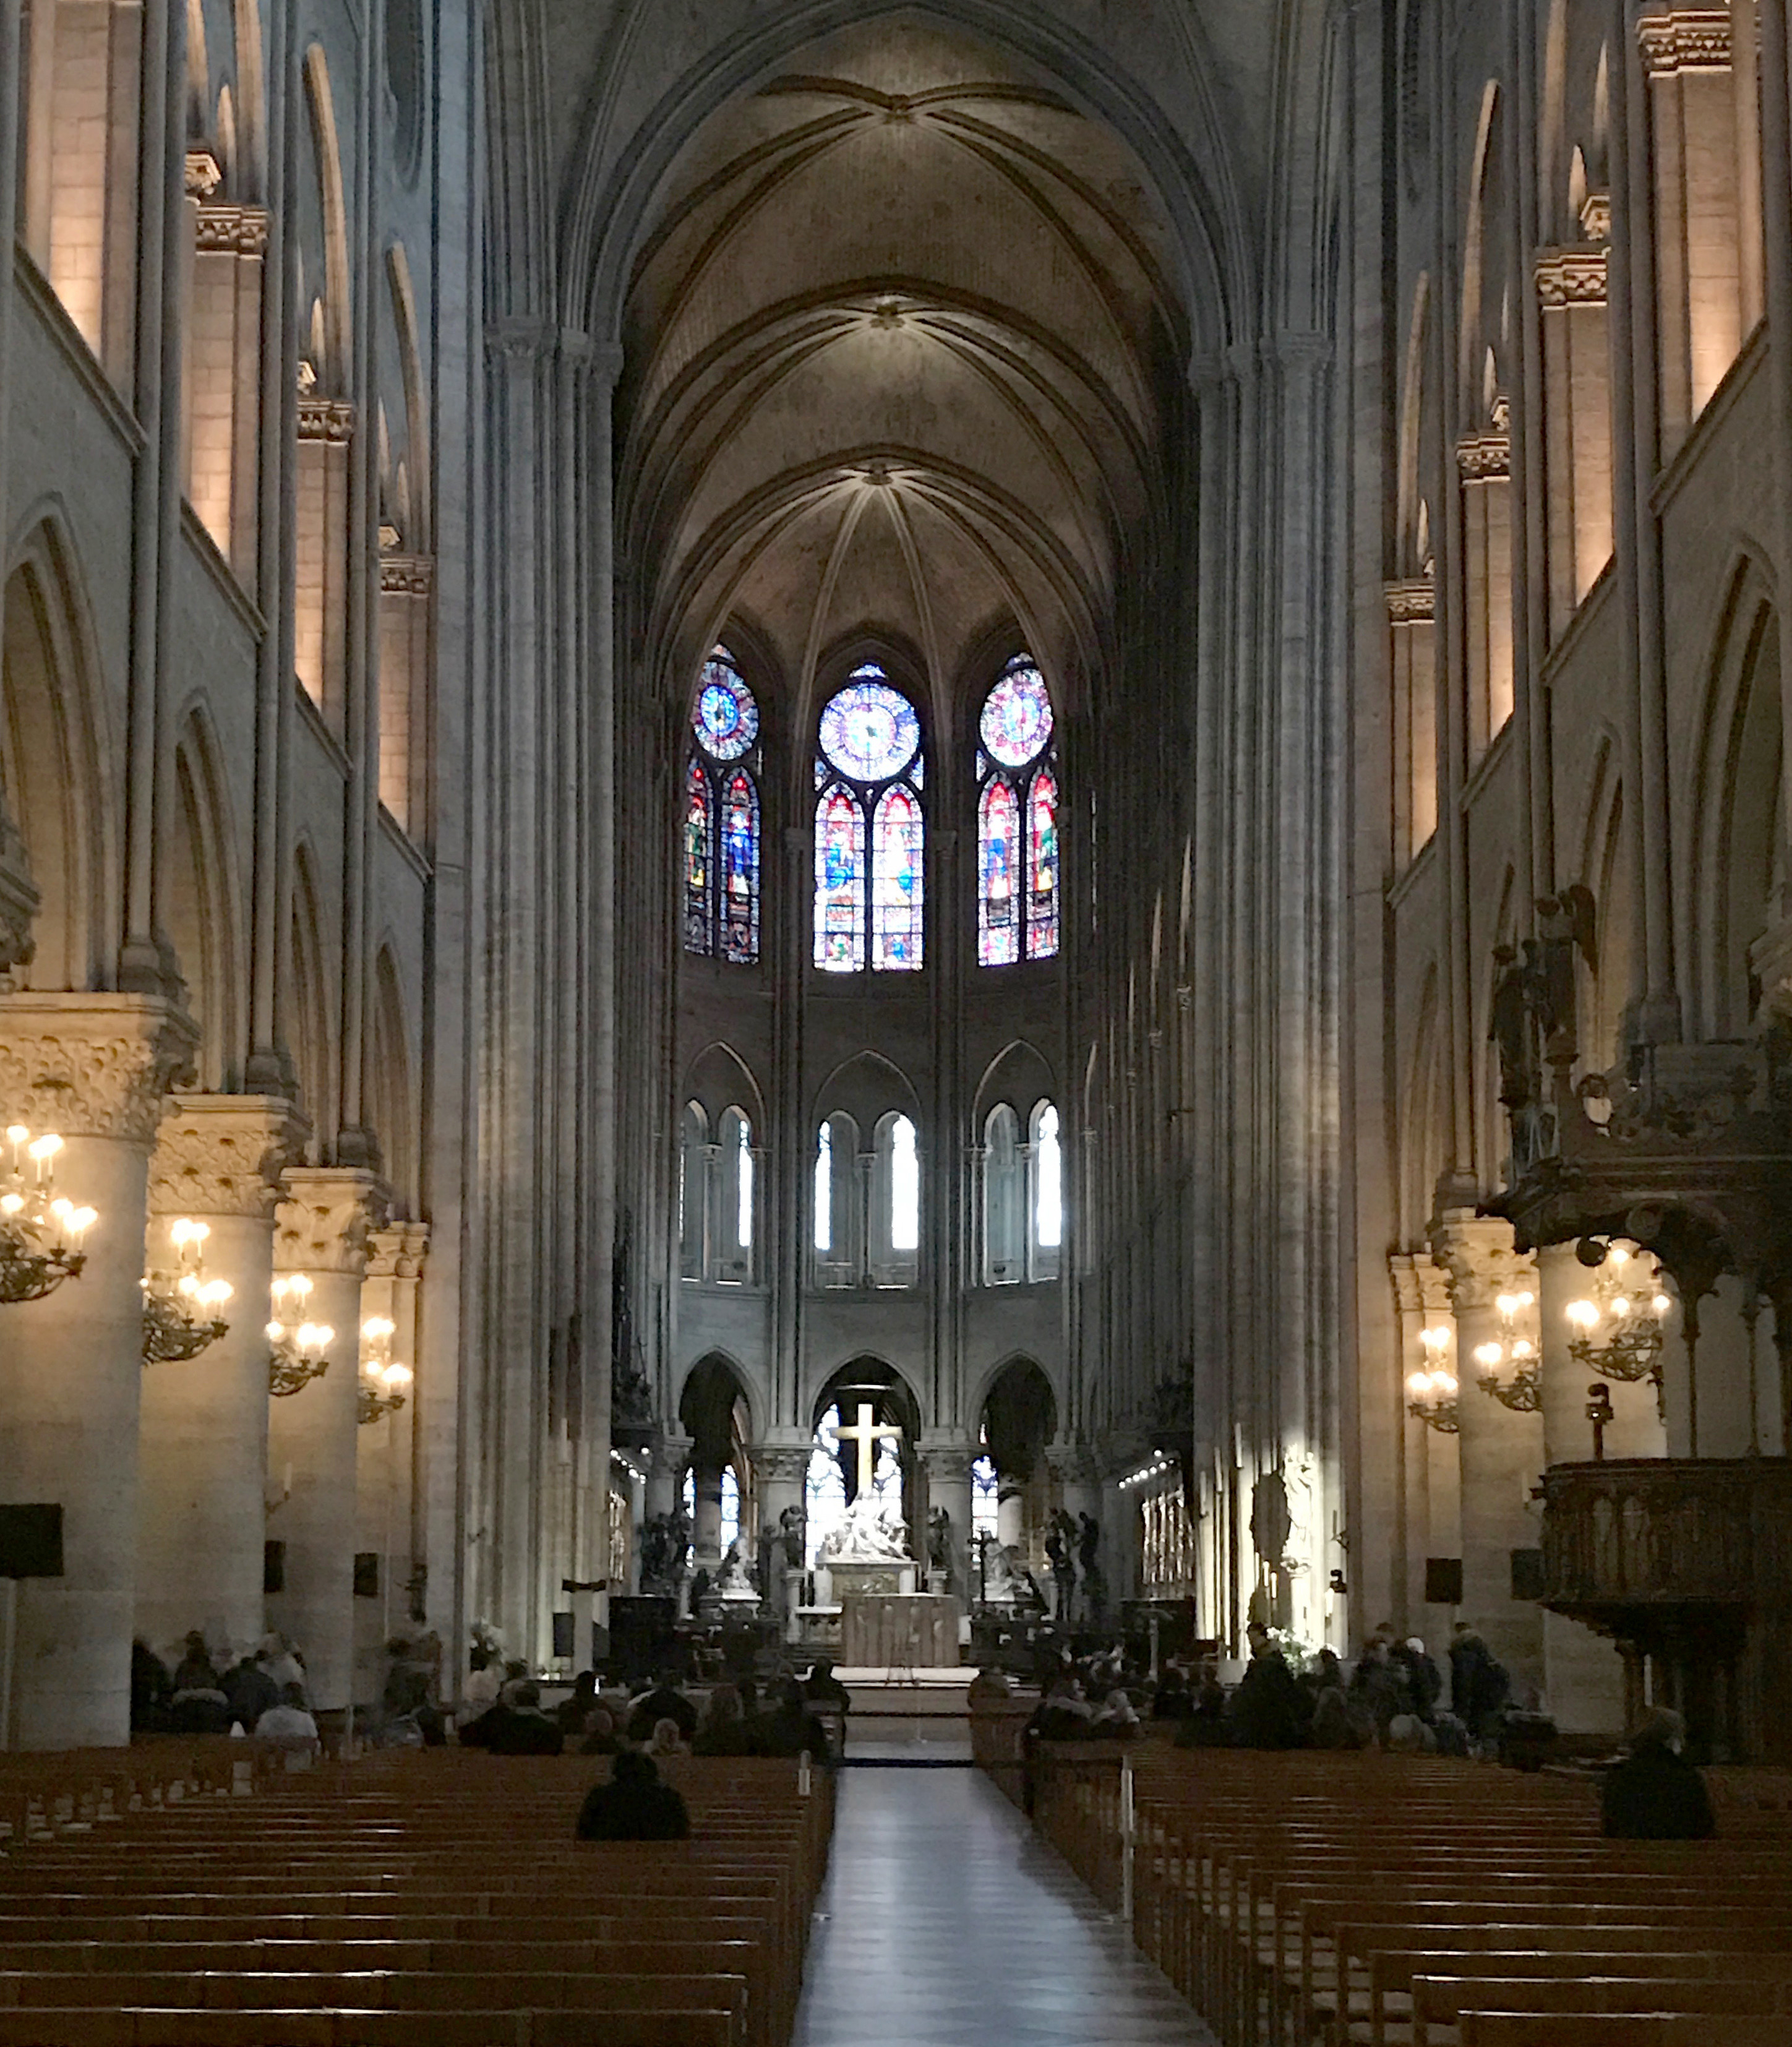 The interior of Notre Dame, taken before the fire